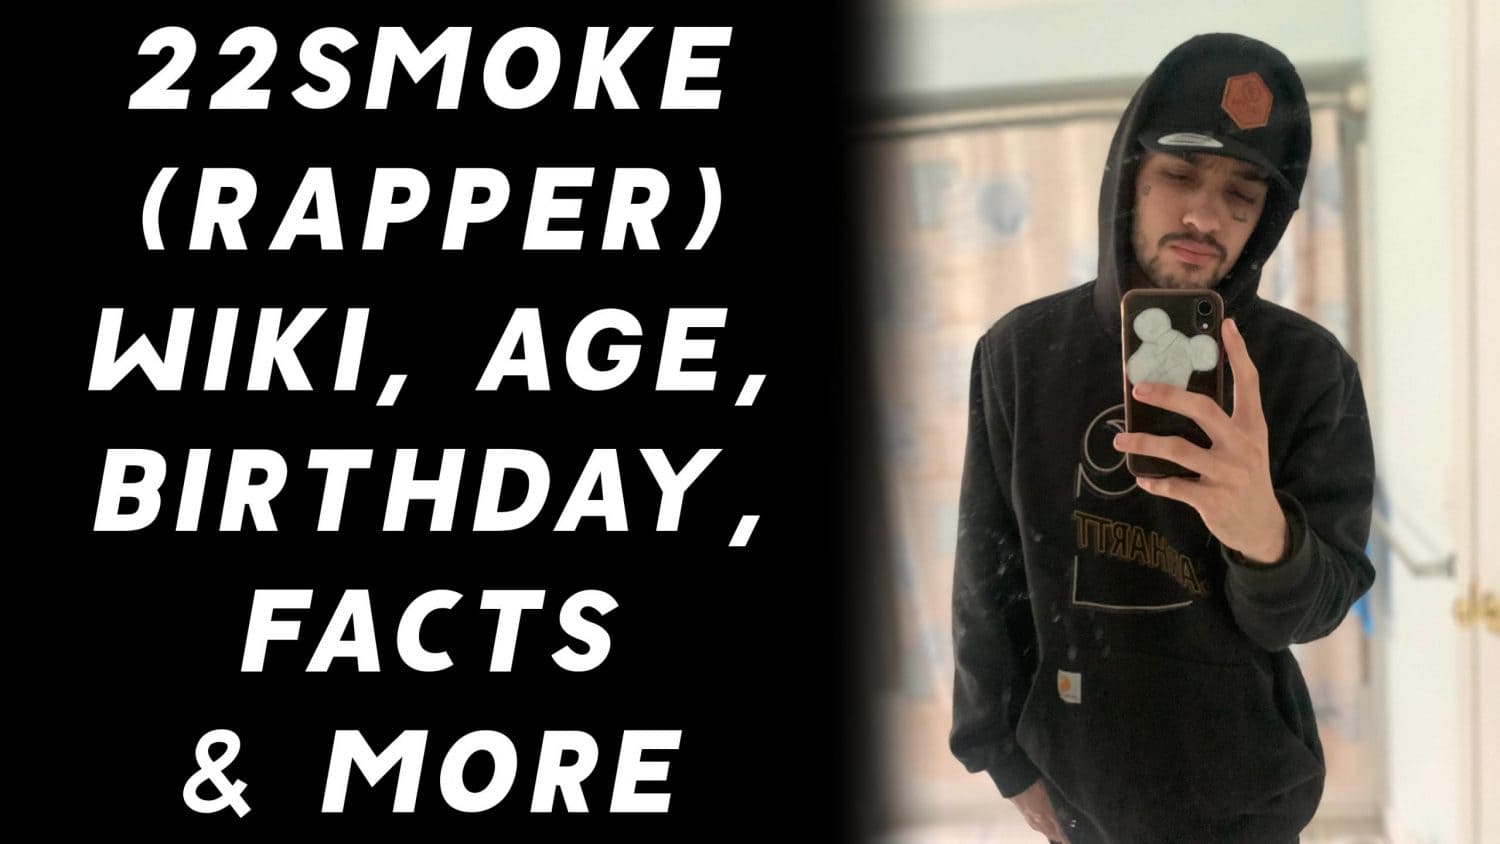 22Smoke (Rapper) Wiki, Age, Birthday, Facts & More 1